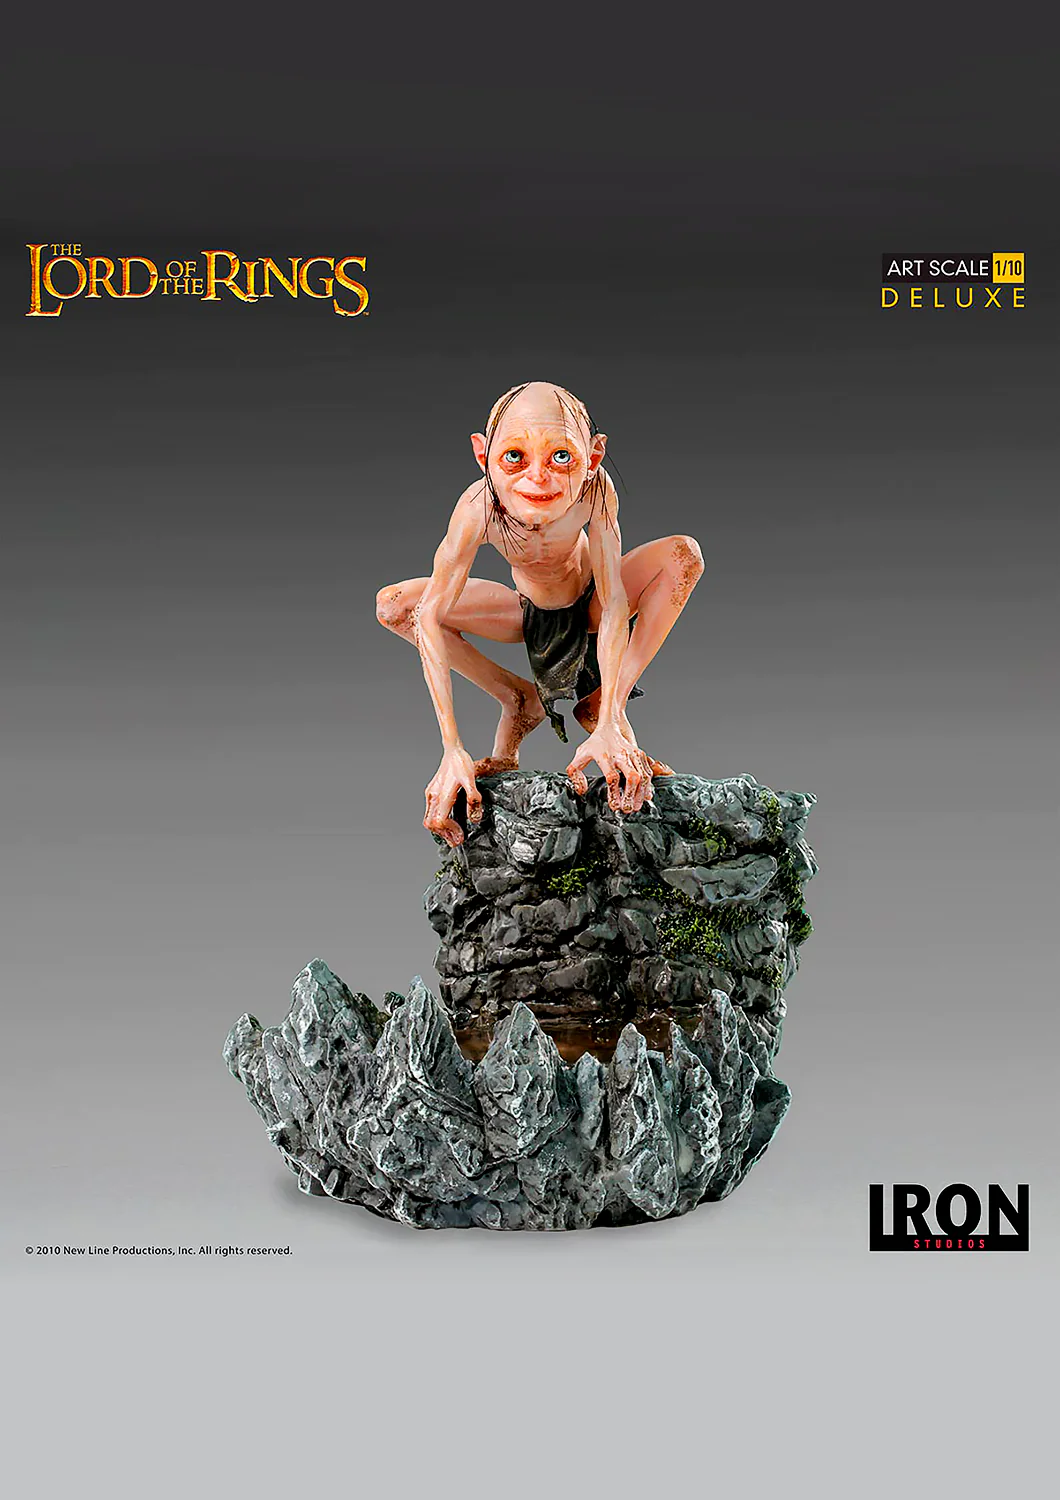 GOLLUM DELUXE ART SCALE 1/10 LORD OF THE RINGS